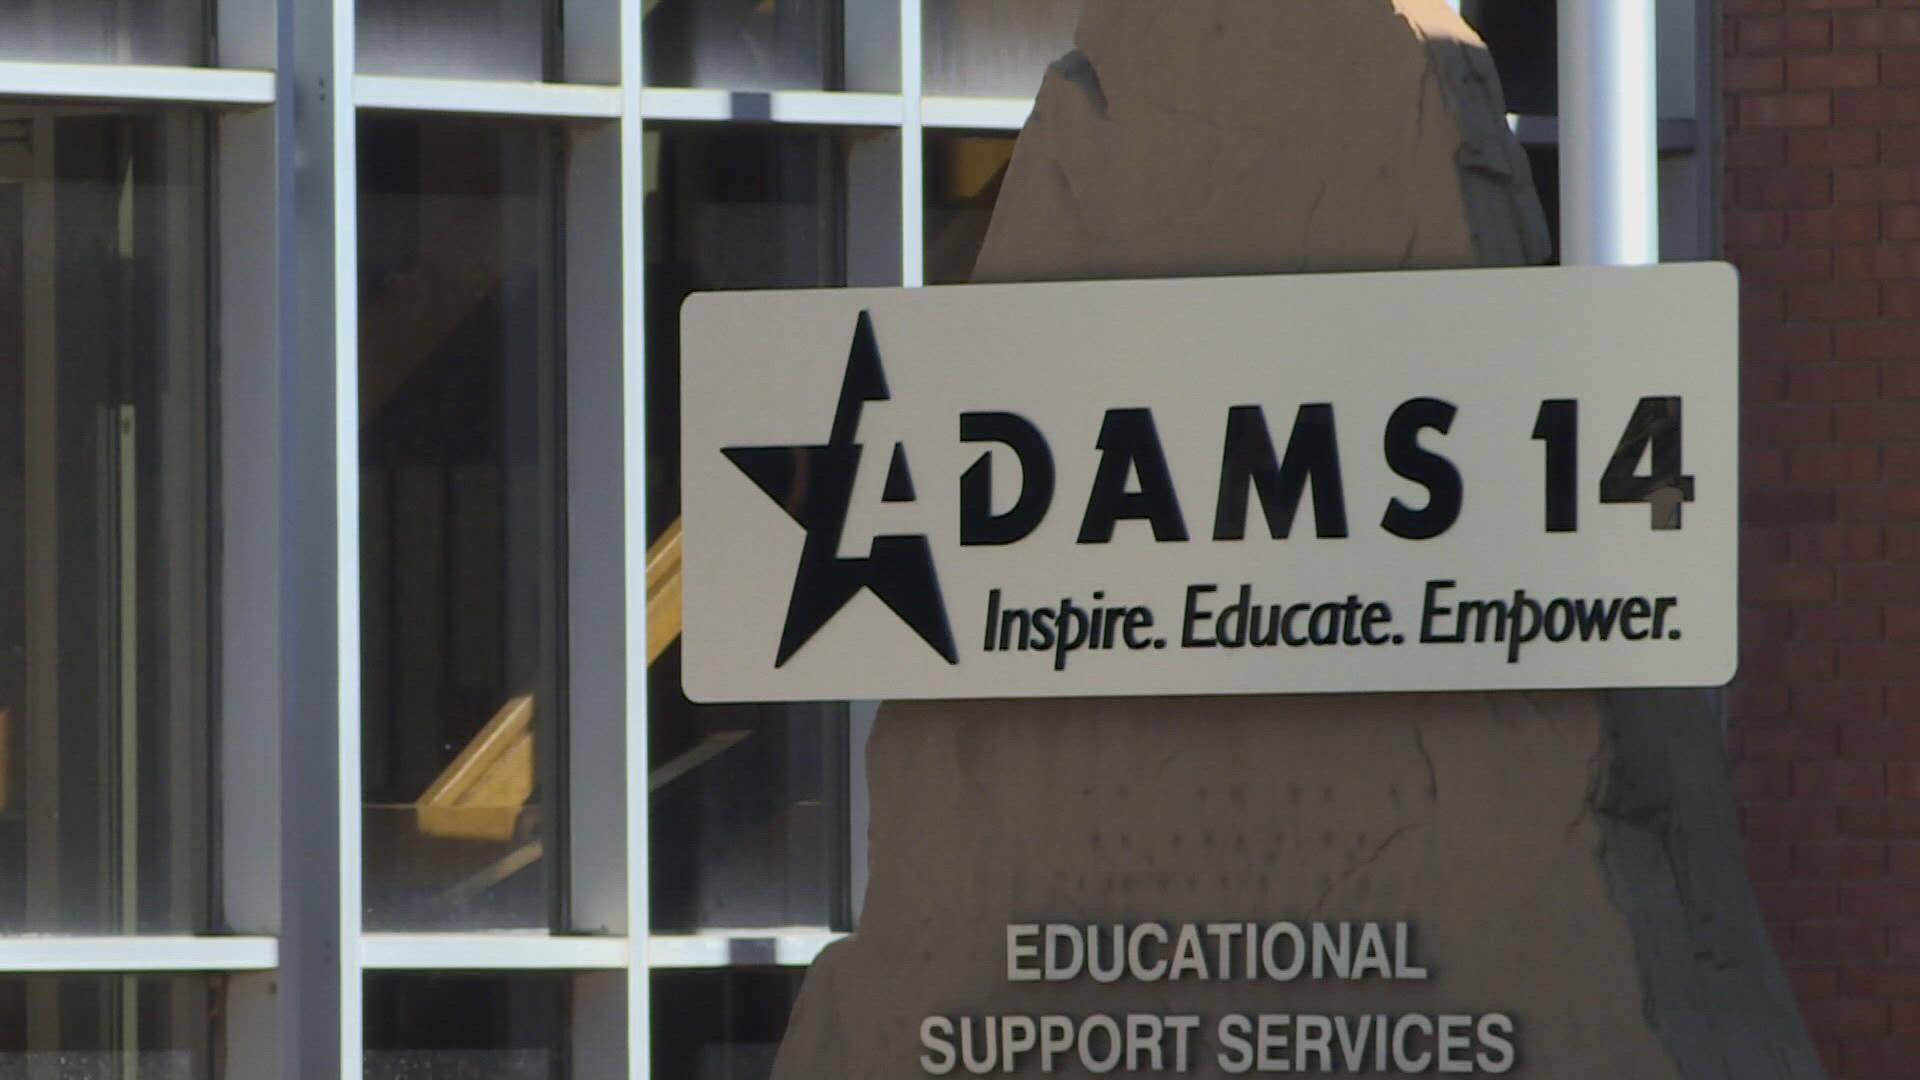 Ramona Lewis resigned effective immediately, the Adams County school district said Tuesday.